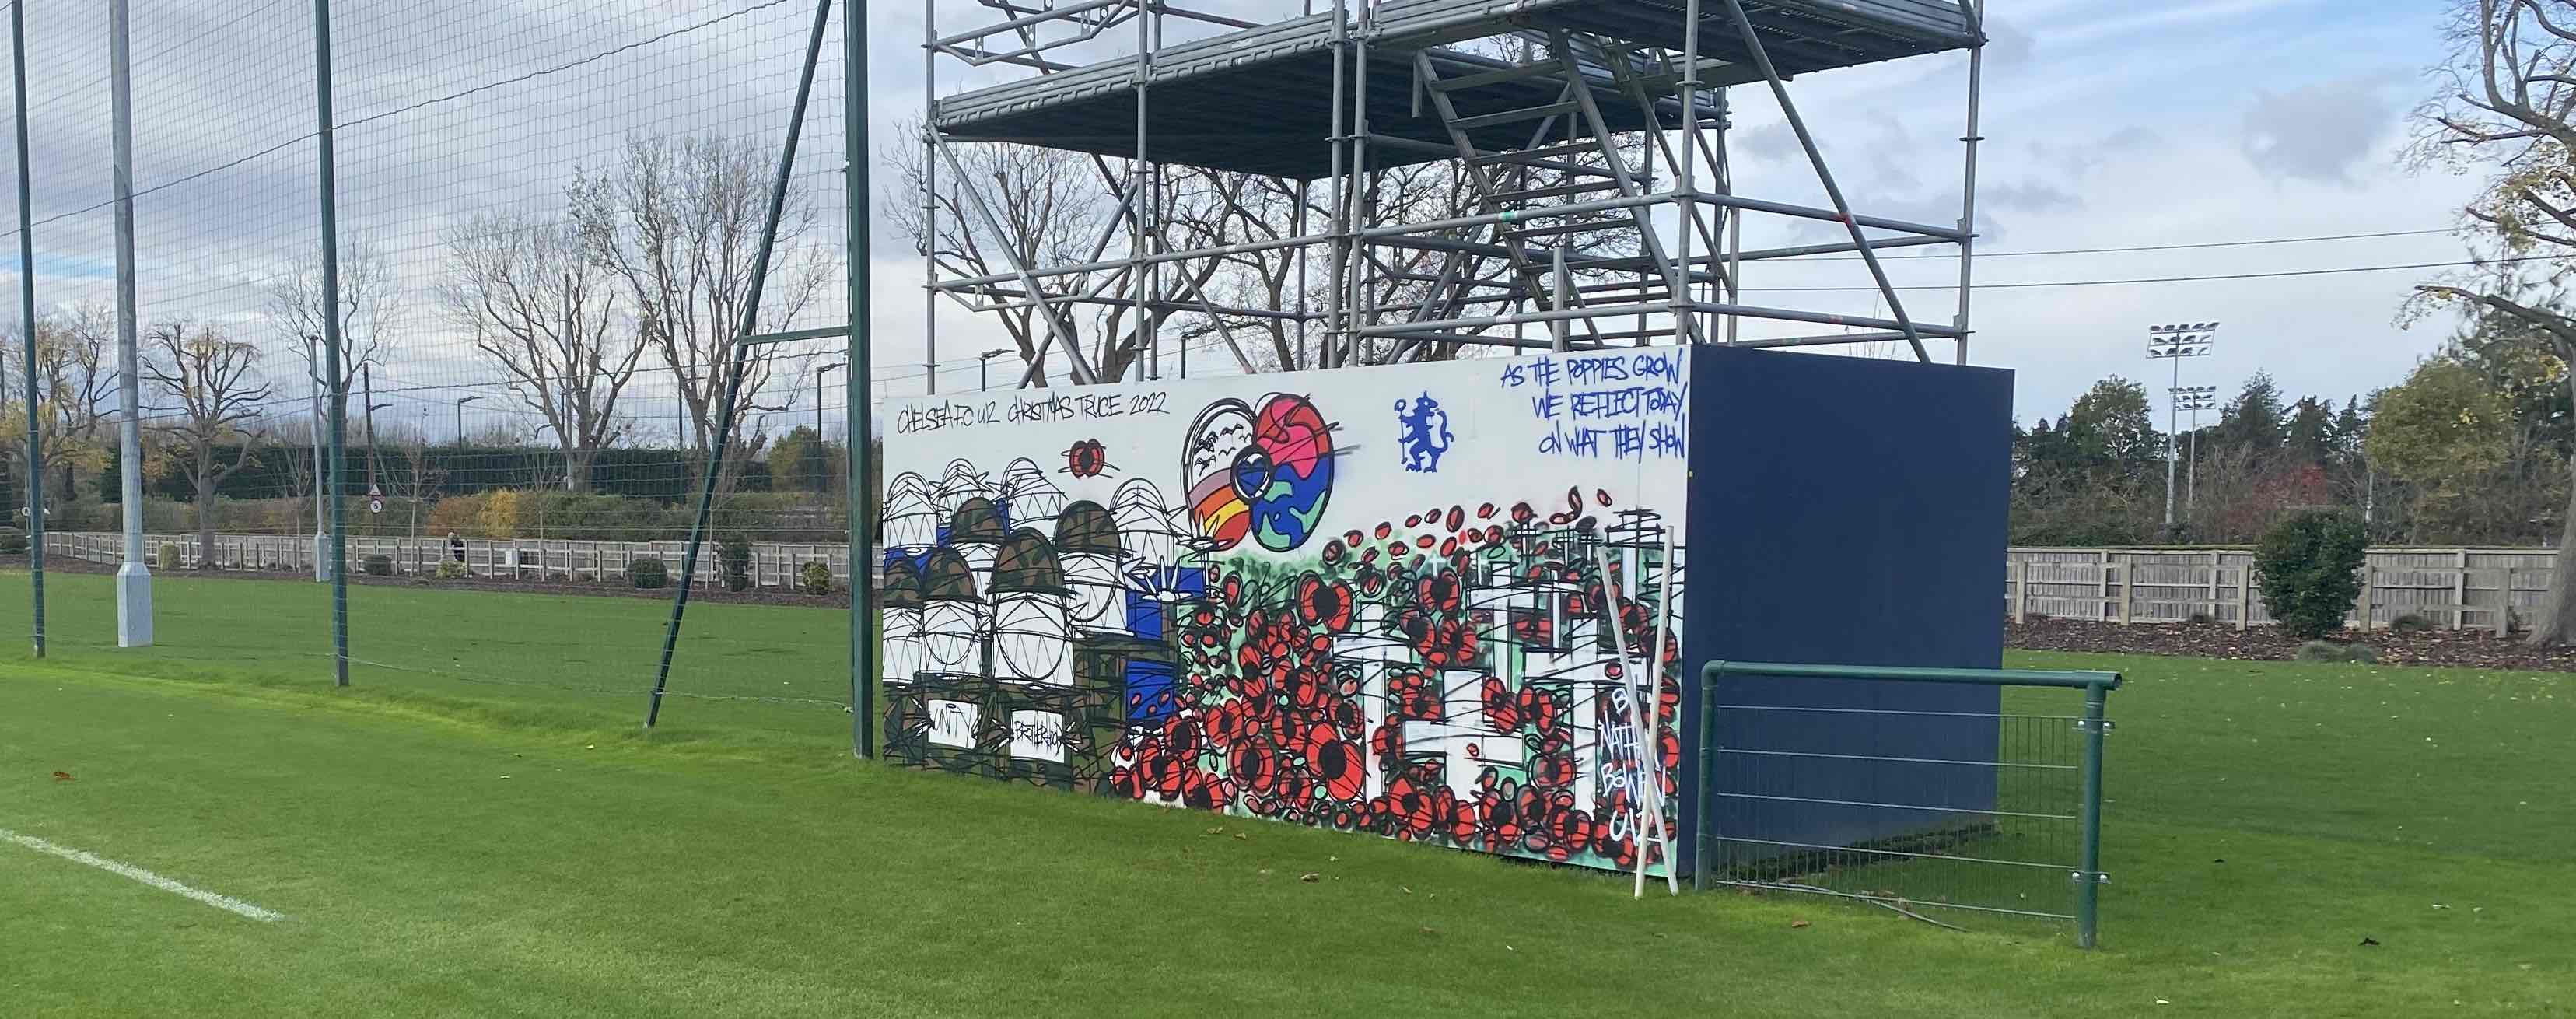 Graffiti artist Nathan Bowen created this mural beside Chelsea's main Academy match pitch as part of the 'Truce Project' to mark Remembrance Day 